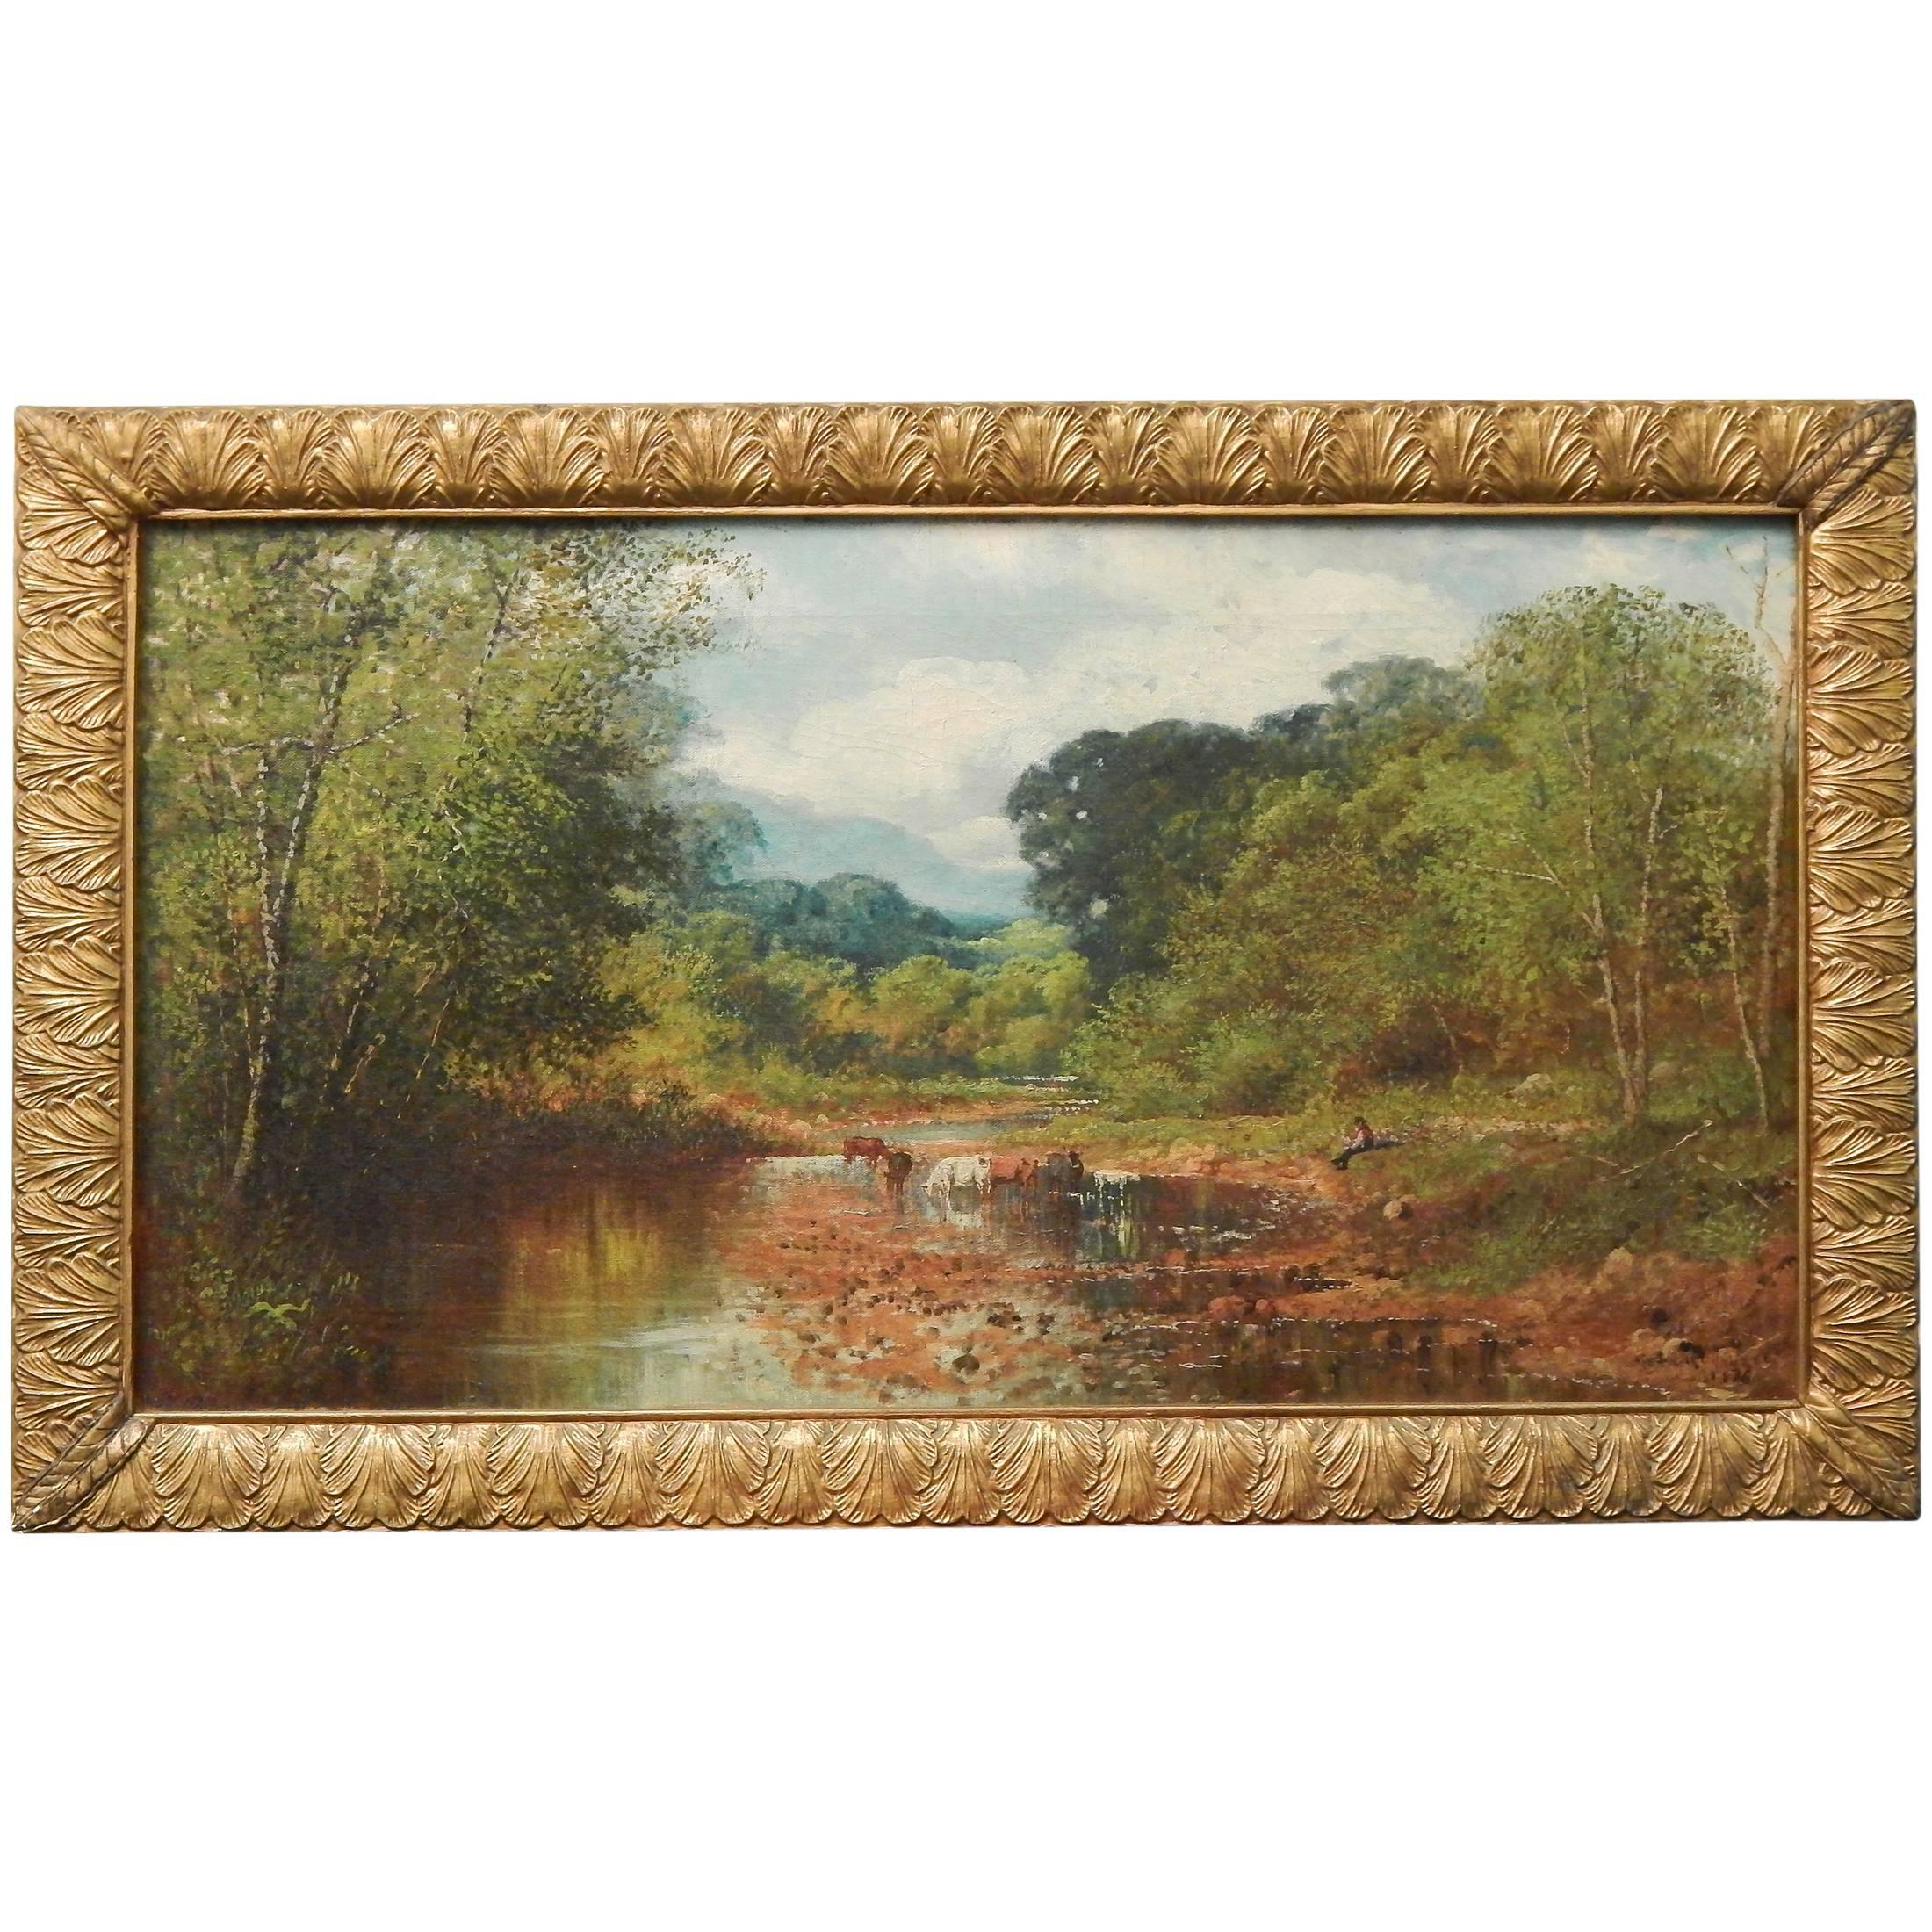 "Landscape with Stream, " Centennial-Era Pastoral Oil Painting by Wilson, 1876